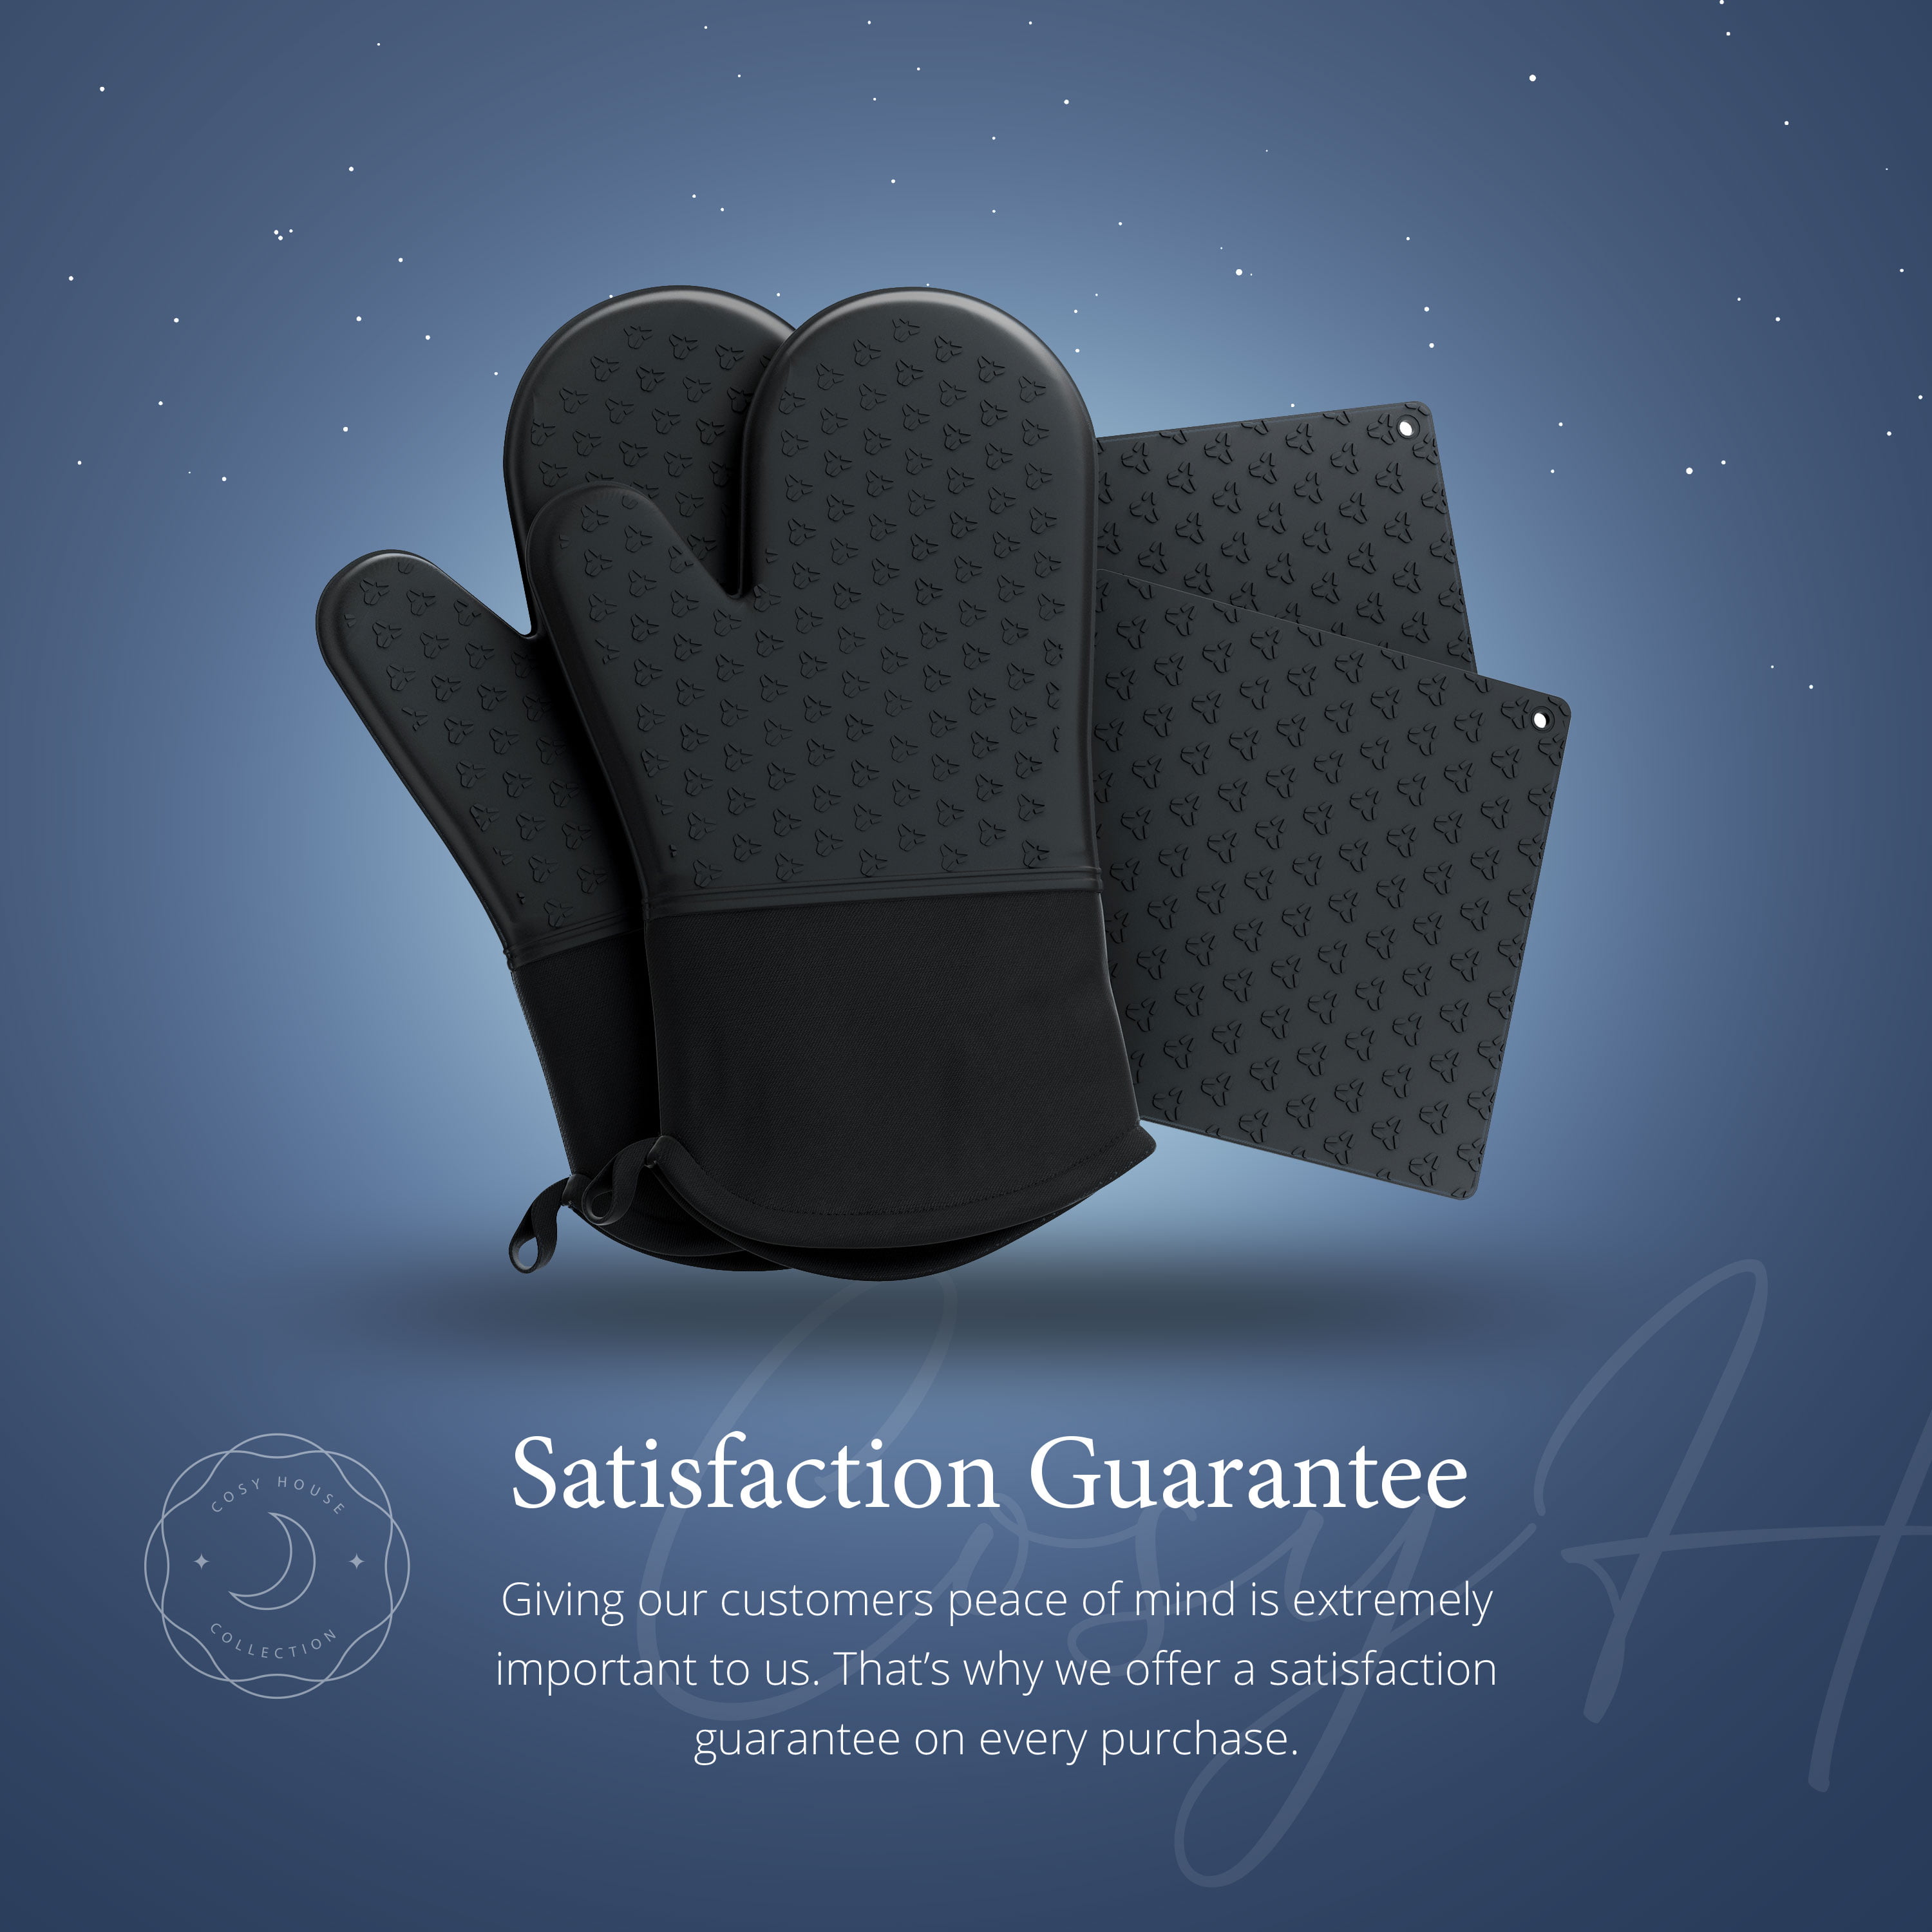 Oven Mitts with Hot Pads Potholders Set Silicone Gloves 500℉ High Heat  Resistant